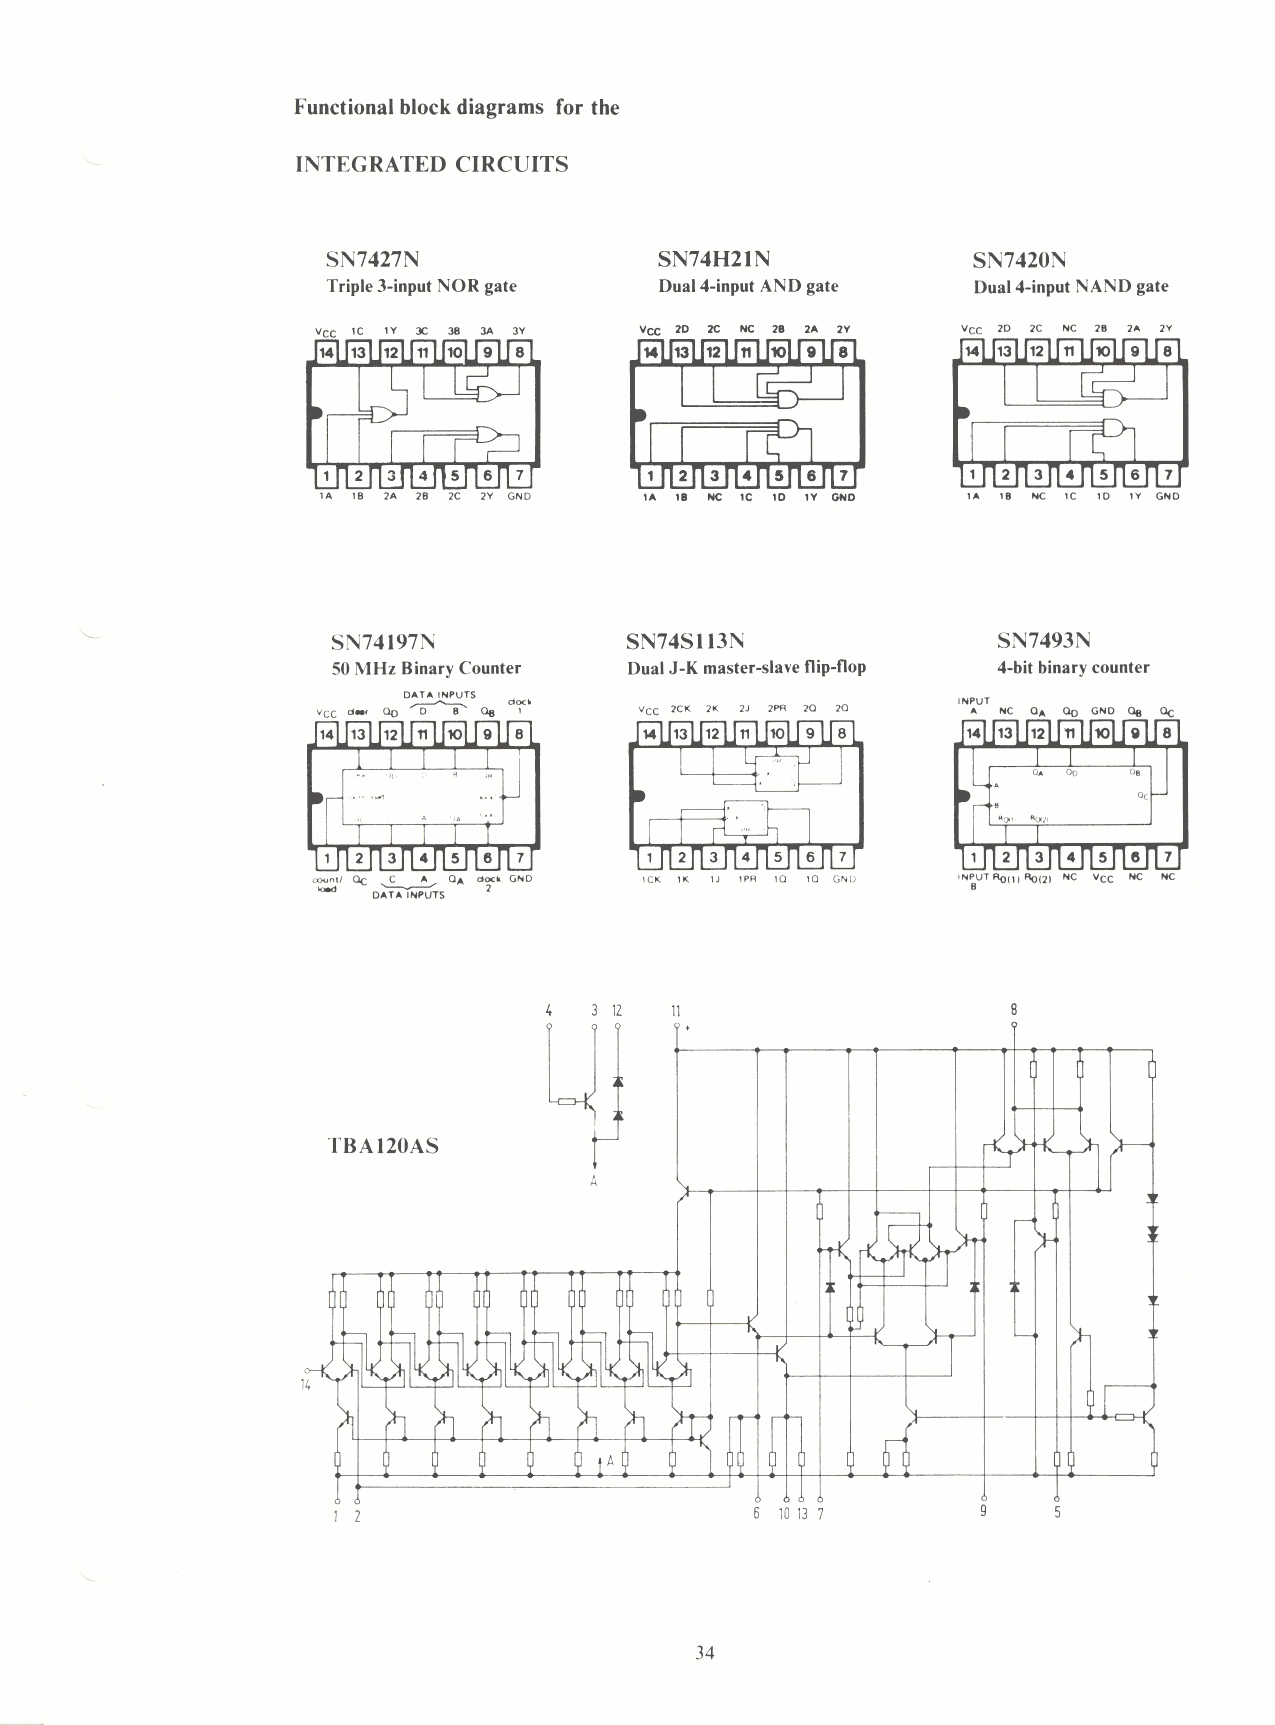 Intergrated circuits-1